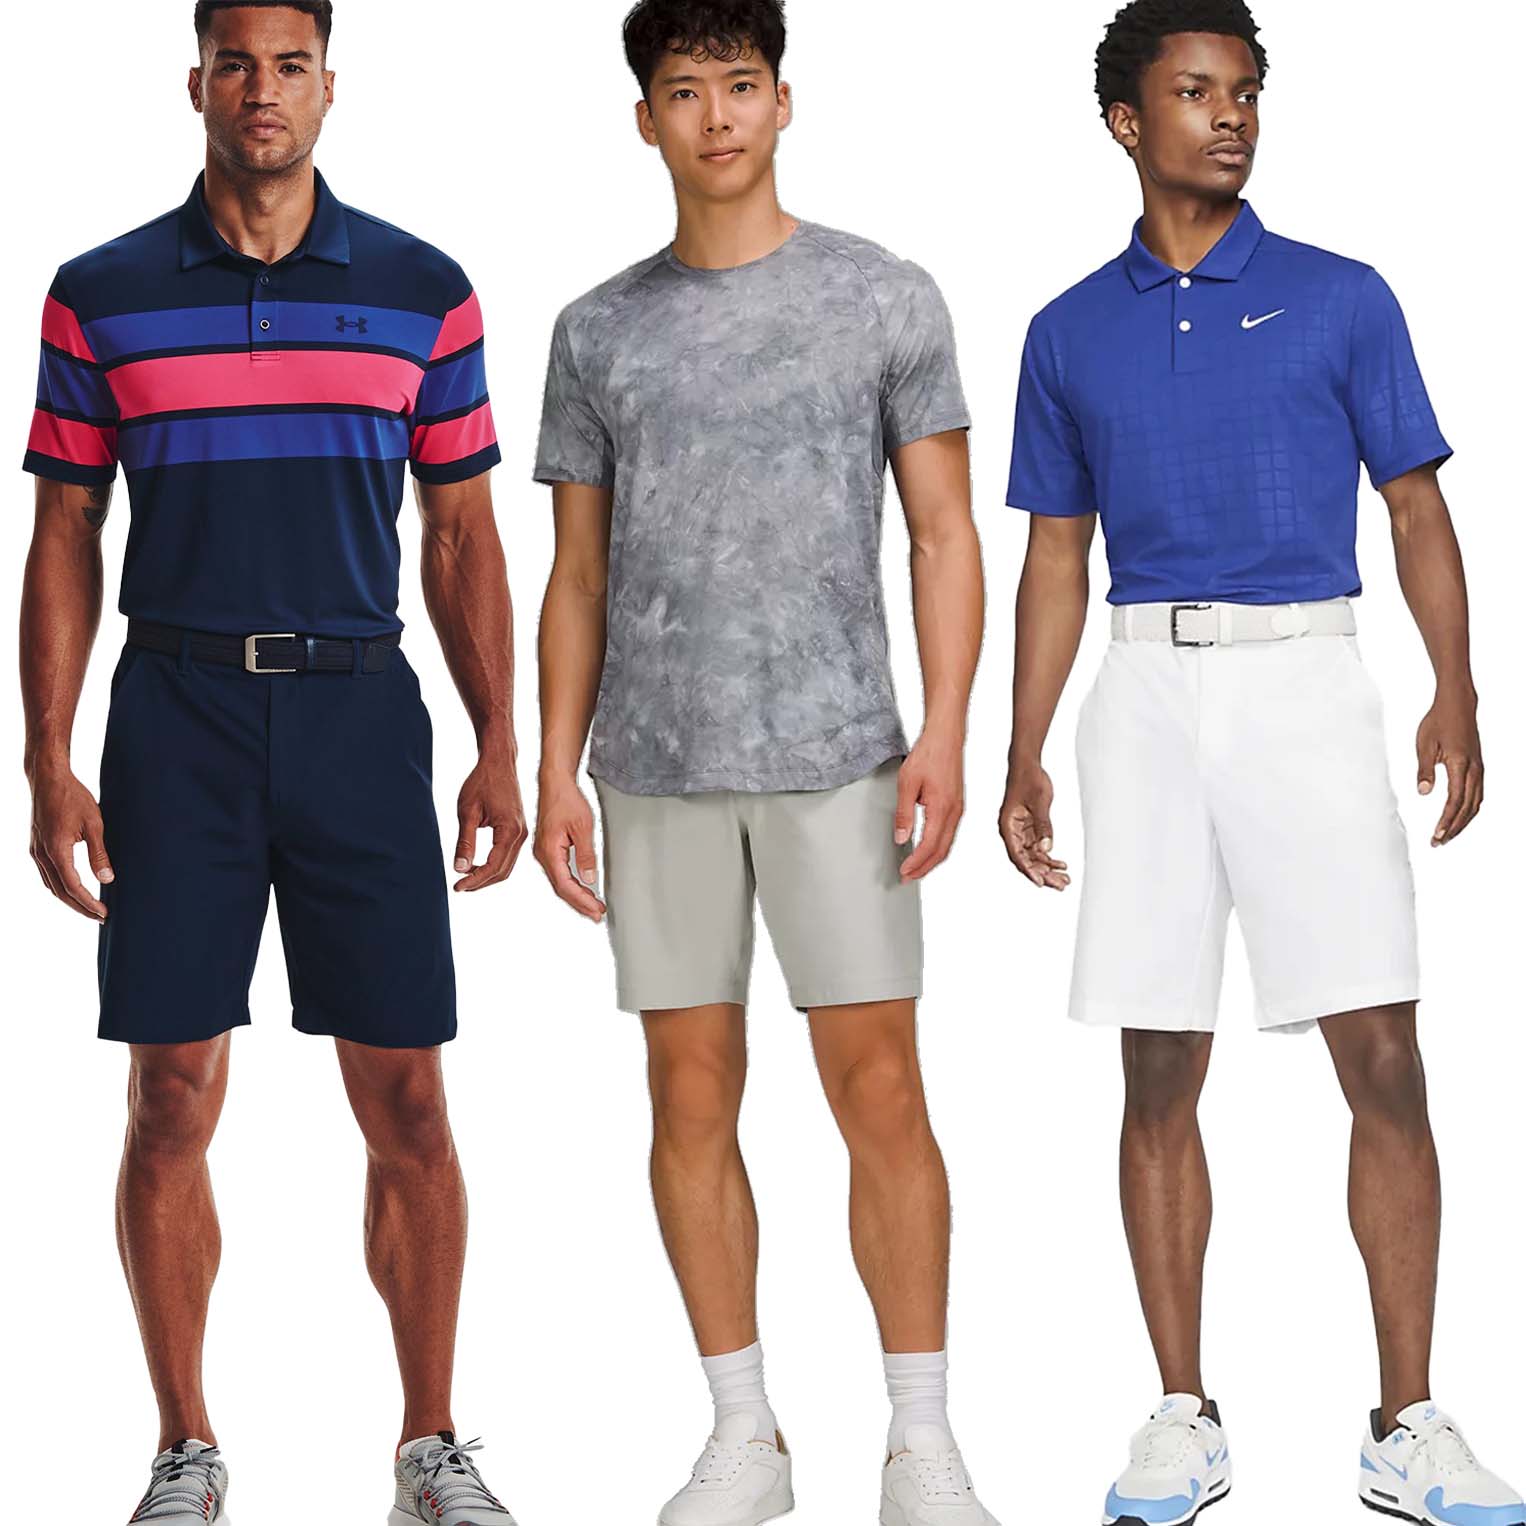 The best lululemon mens golf clothes according to our editors  Golf  Equipment Clubs Balls Bags  Golf Digest